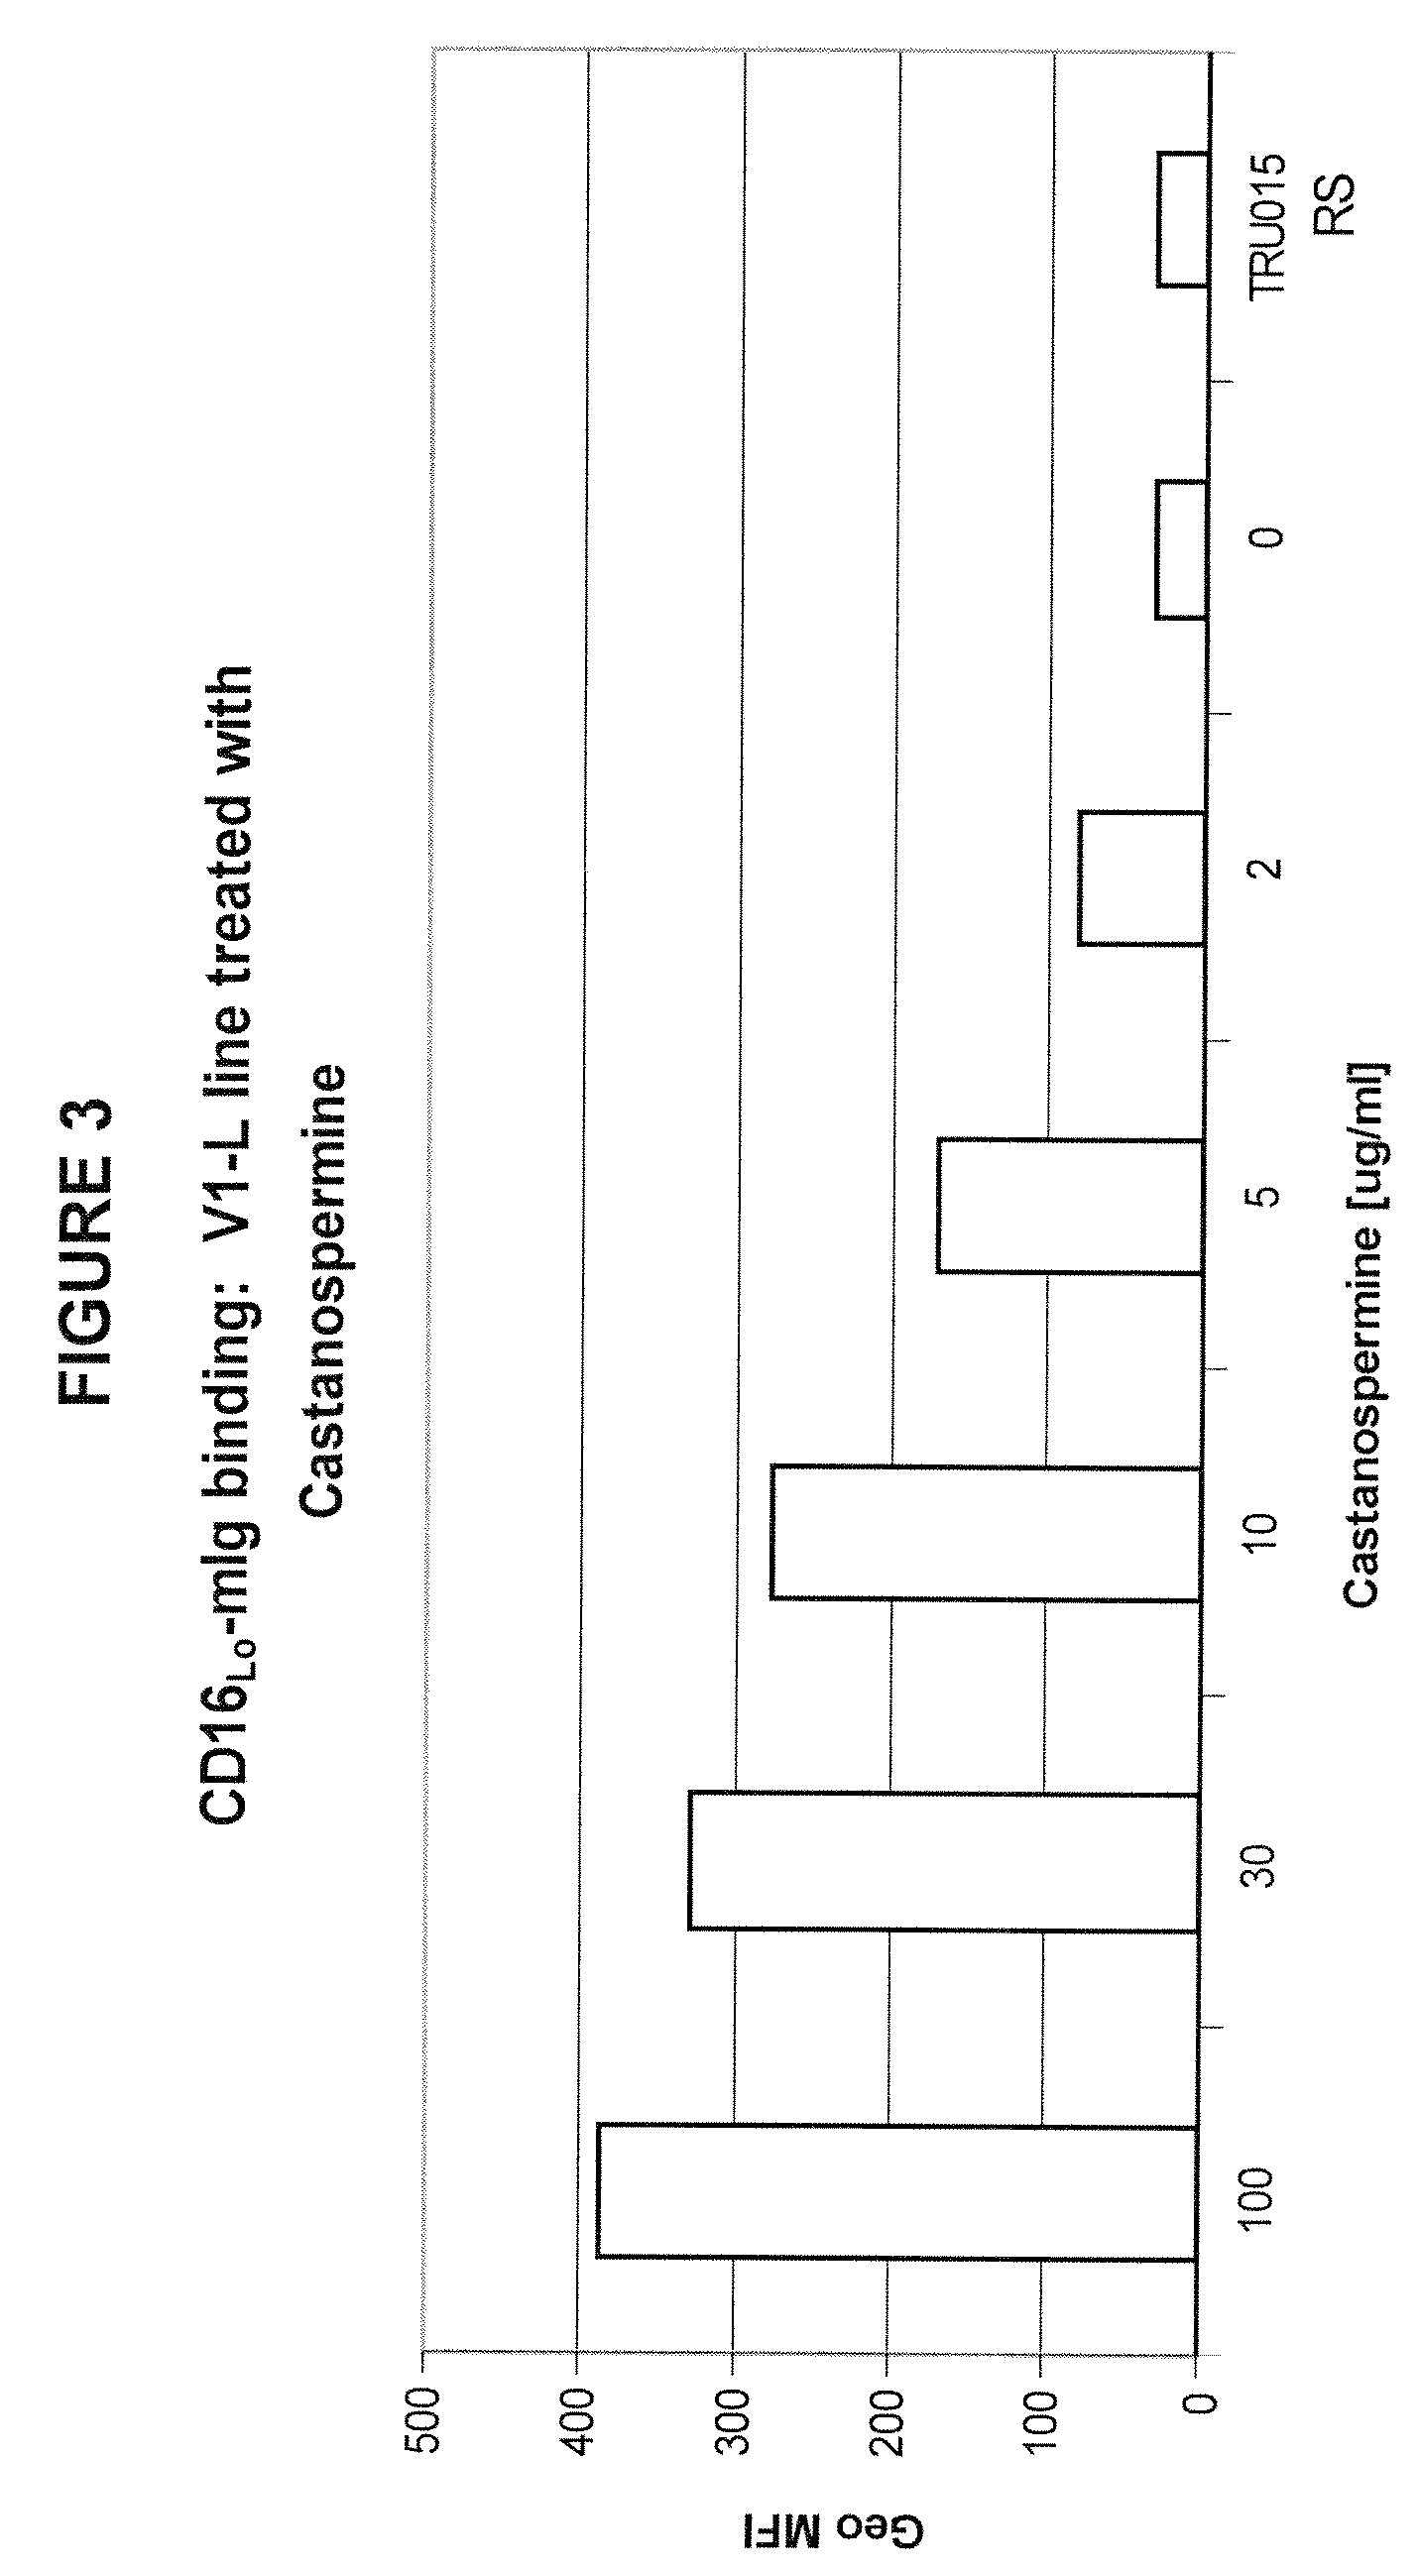 Materials and methods for improved immunoglycoproteins